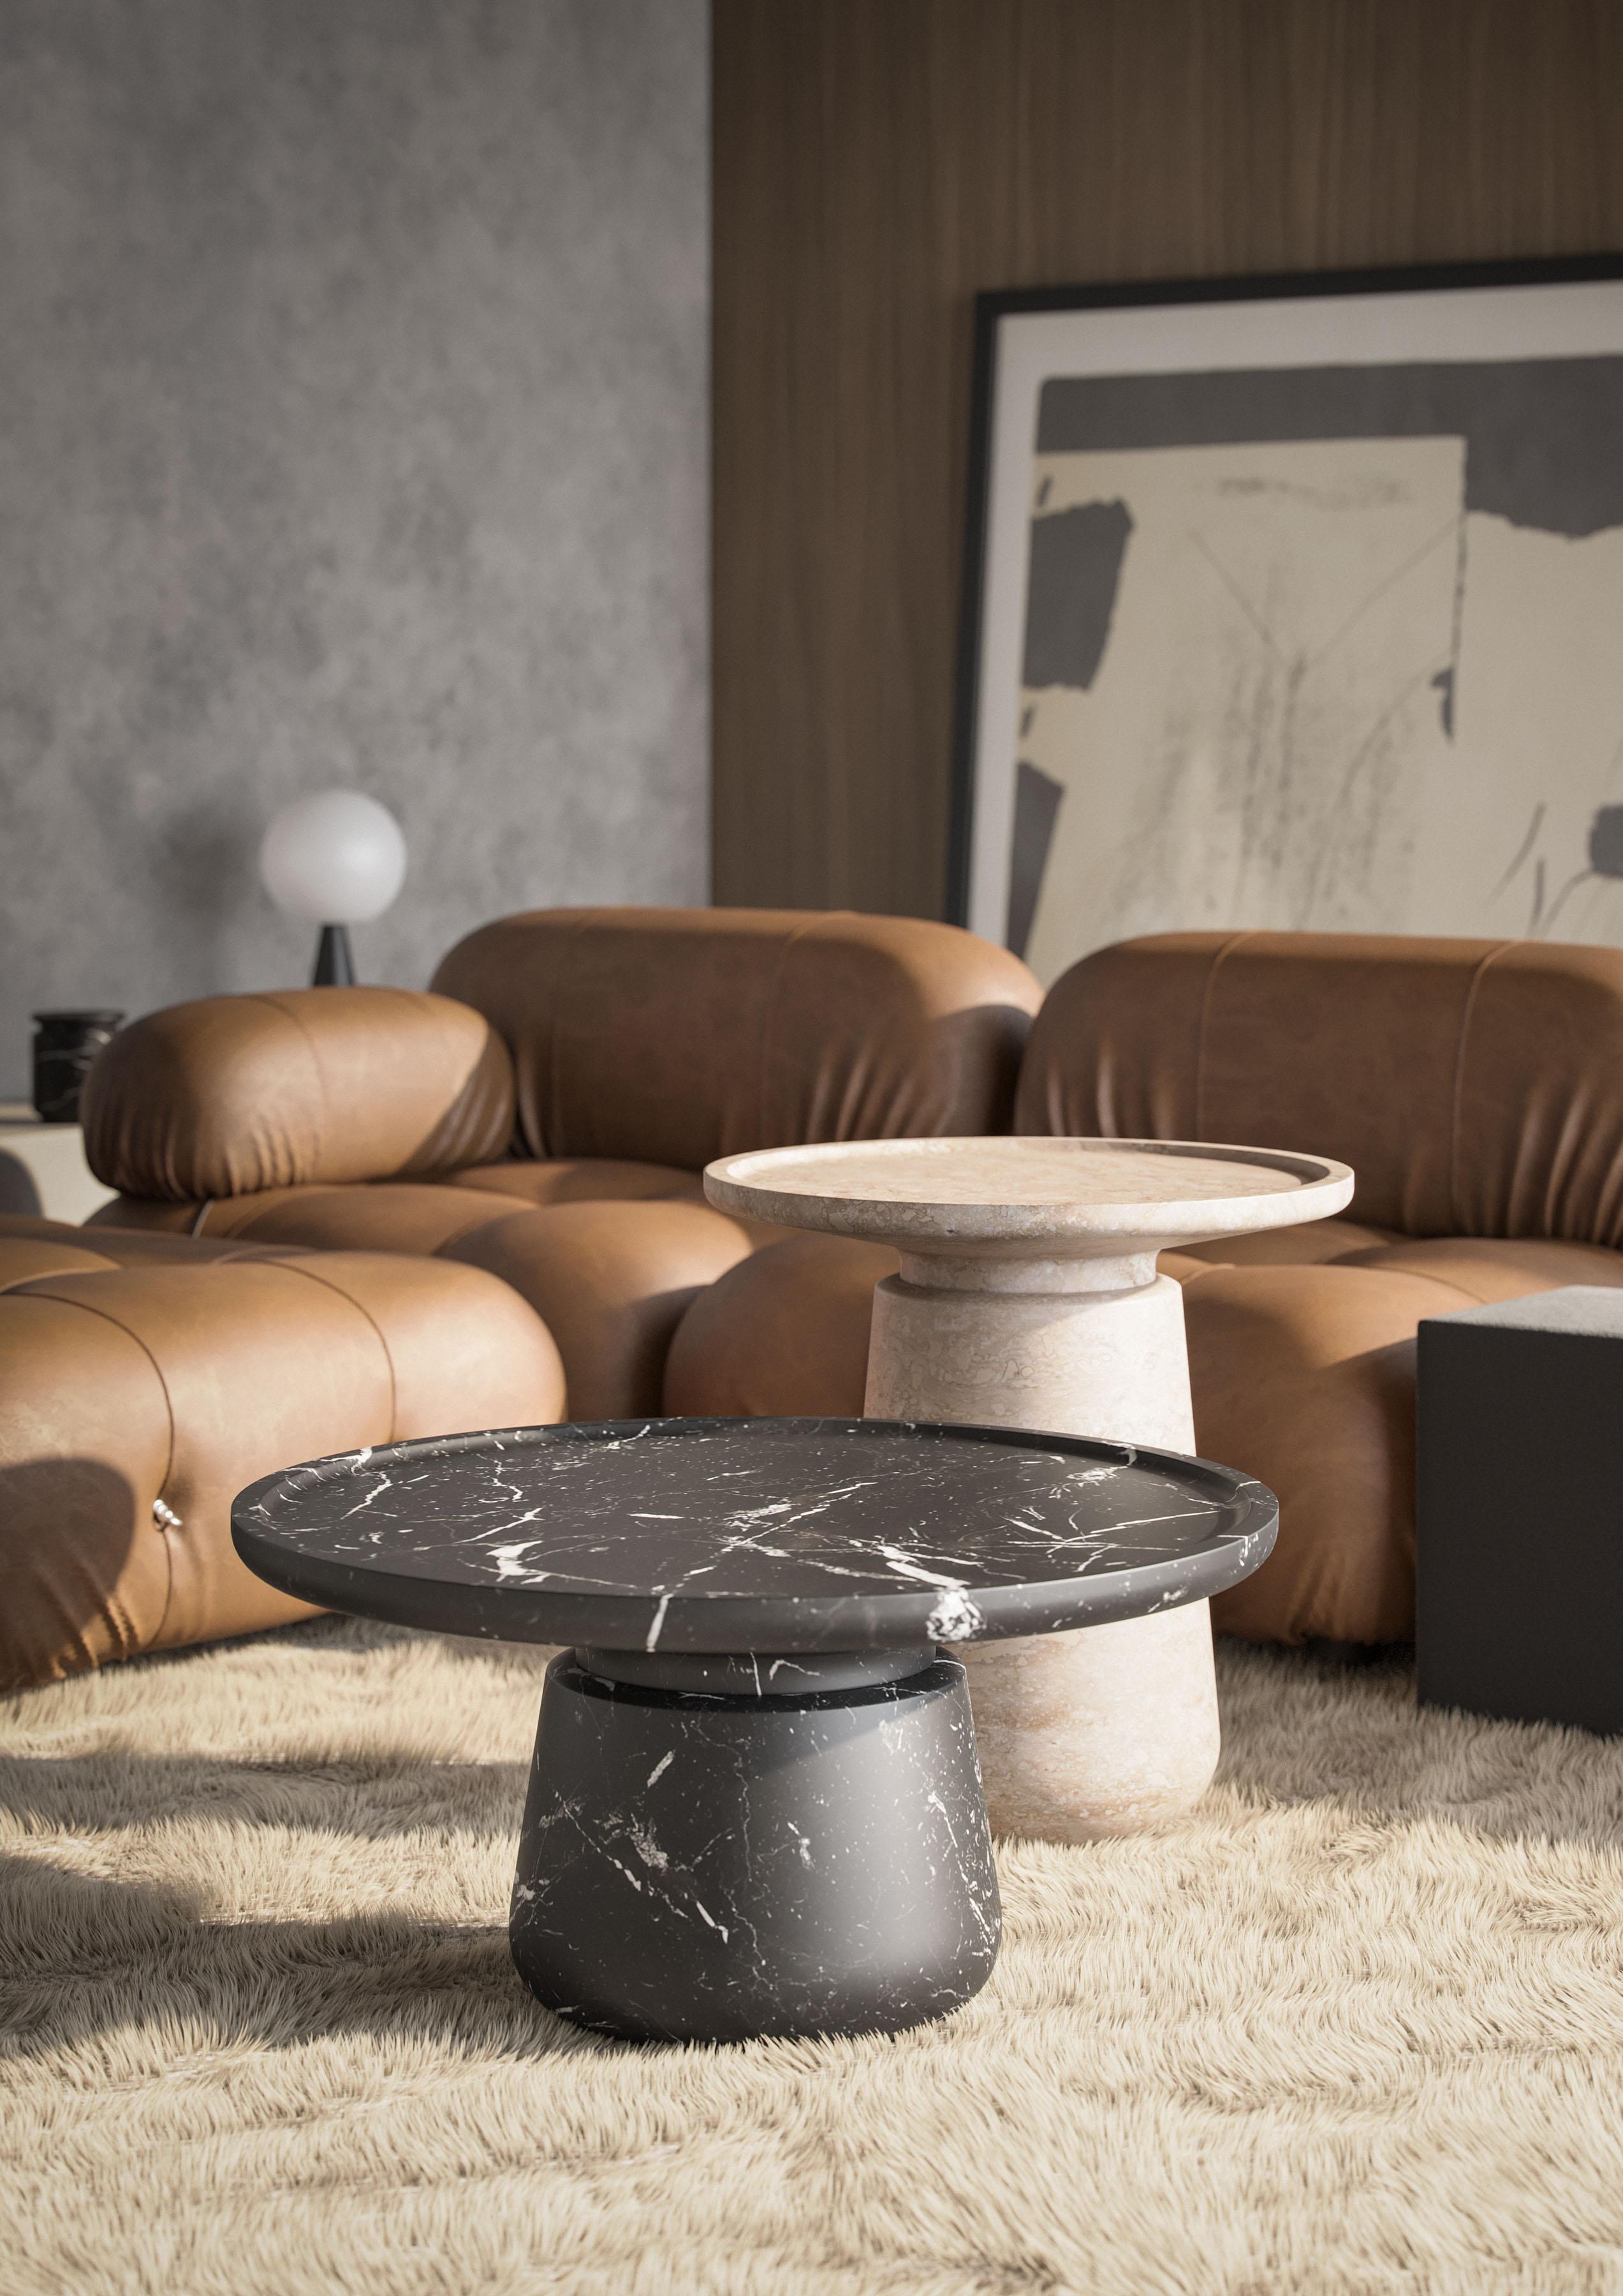 Black Marquinia marble coffee table. Size: 29,4 (base) x 75 (top diameter) x 36 (height) cm - round top -, 11.6 x 29.5 x 14.2 in., smooth finishing. Commercial name: Altana Large by the Spanish Designer Ivan Colominas.
No borders
Like the